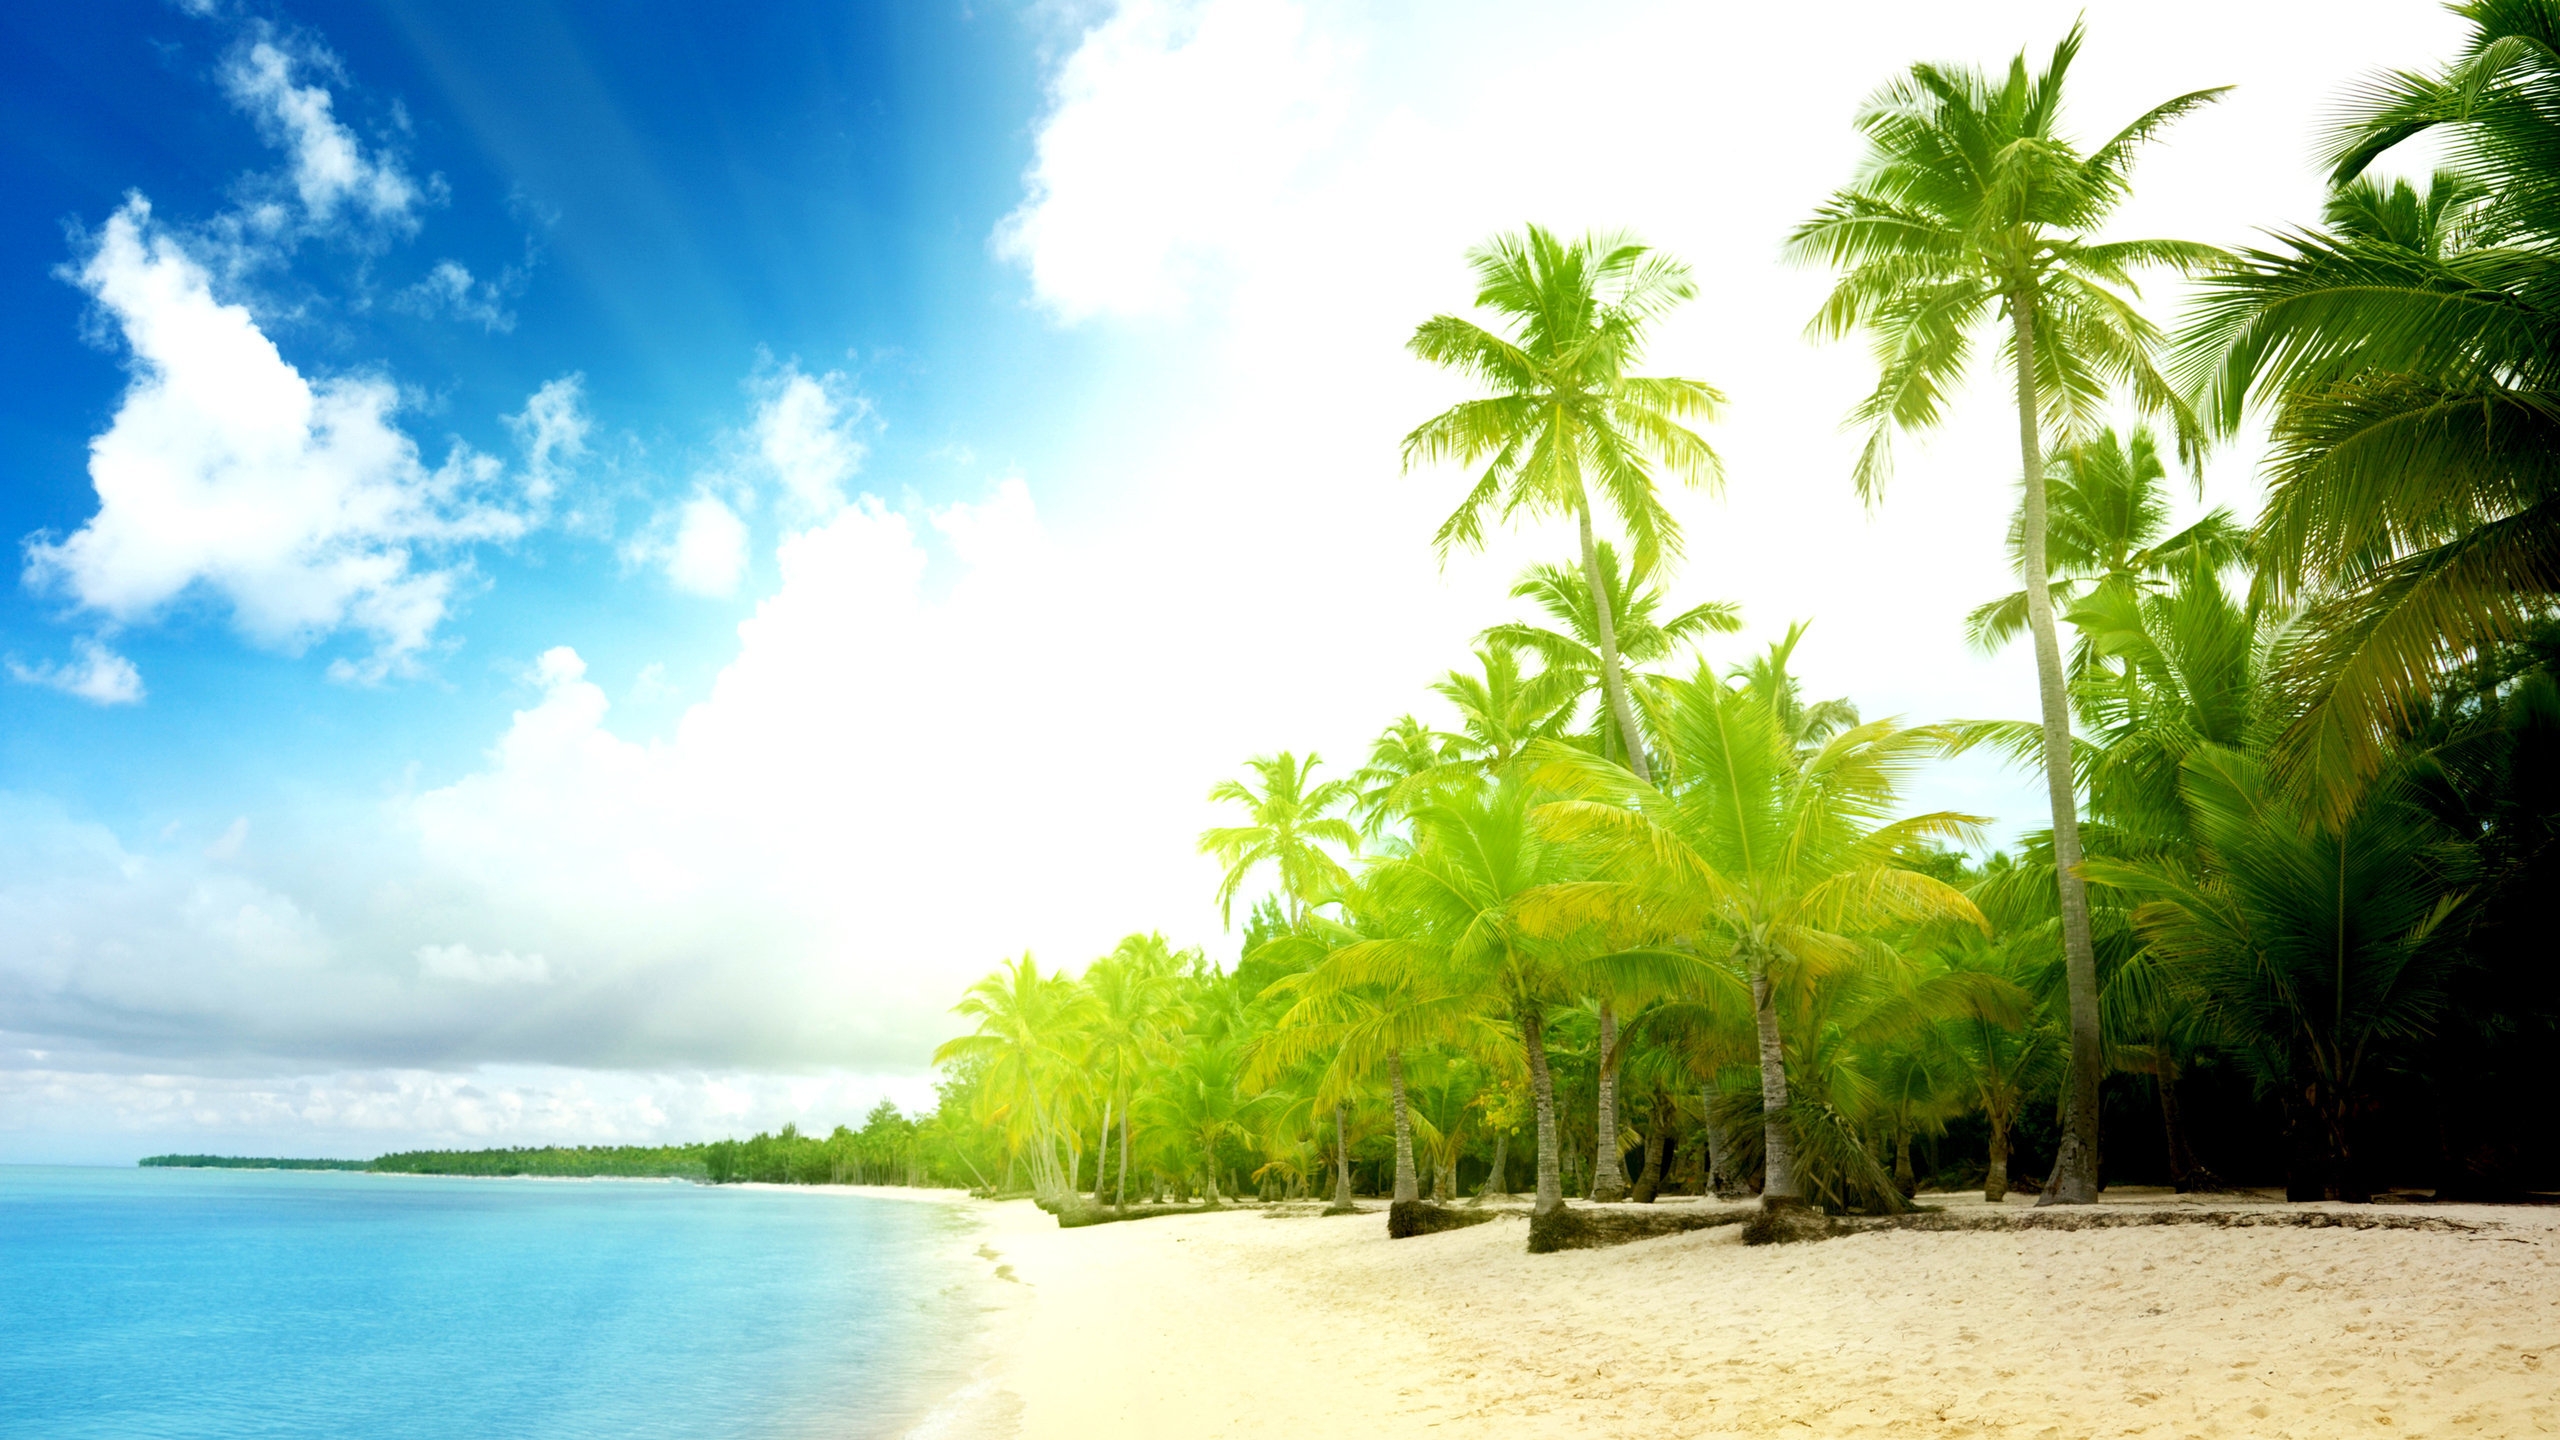 Amazing Exotic beach for 2560x1440 HDTV resolution